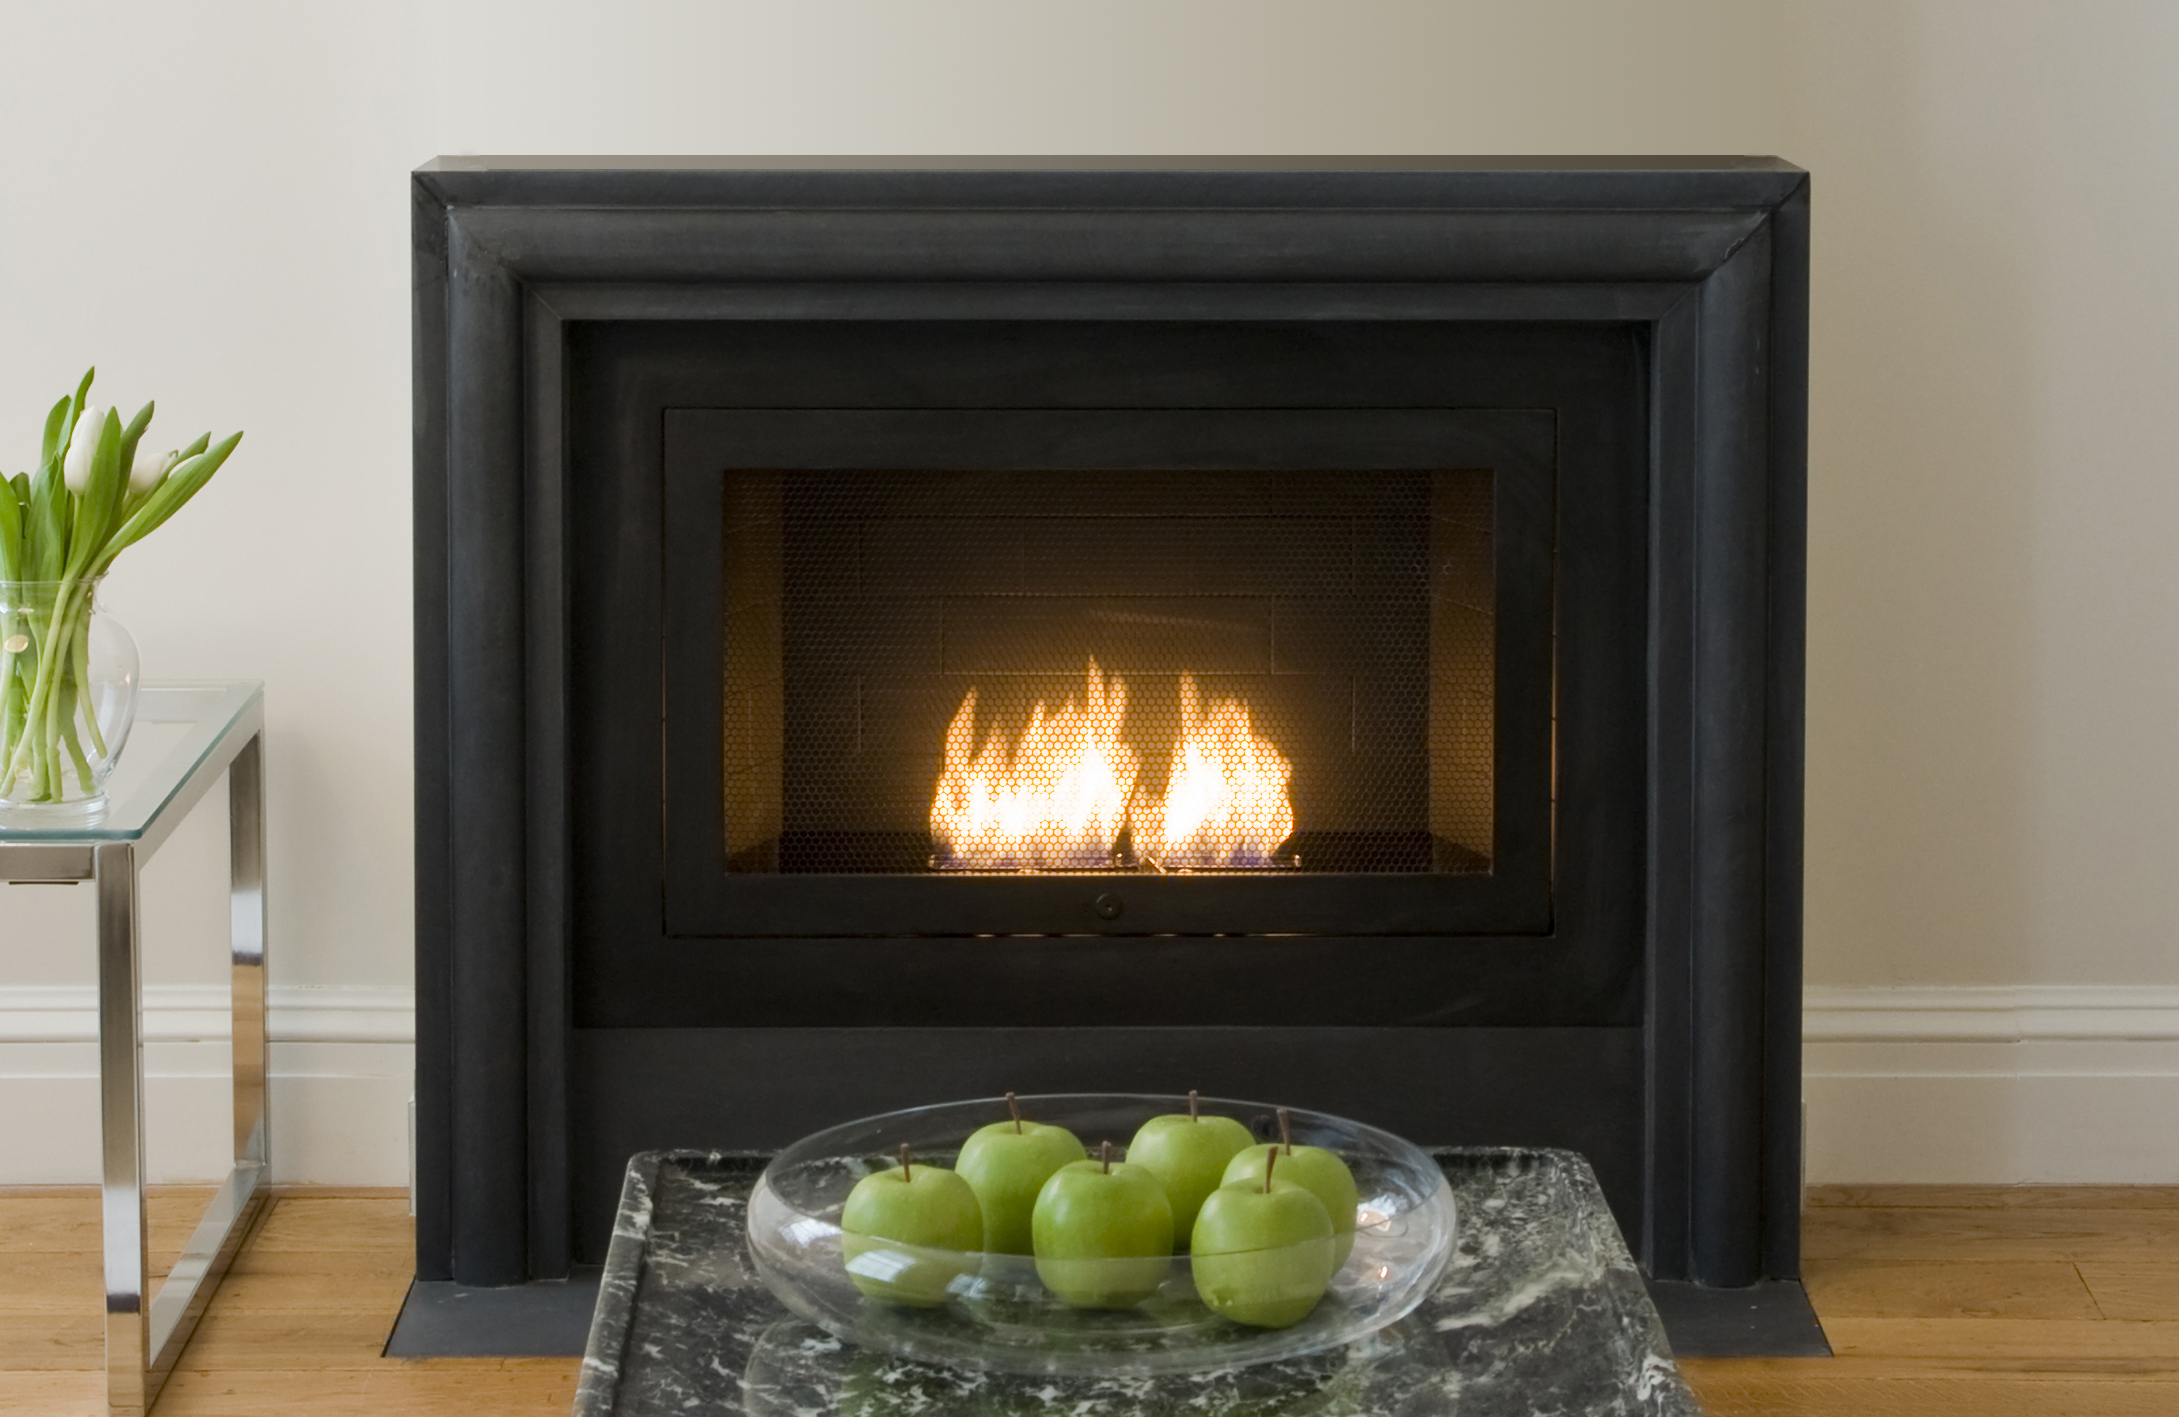 Apartment Fireplaces Home Fireplaces Residential By Hearthcabinet